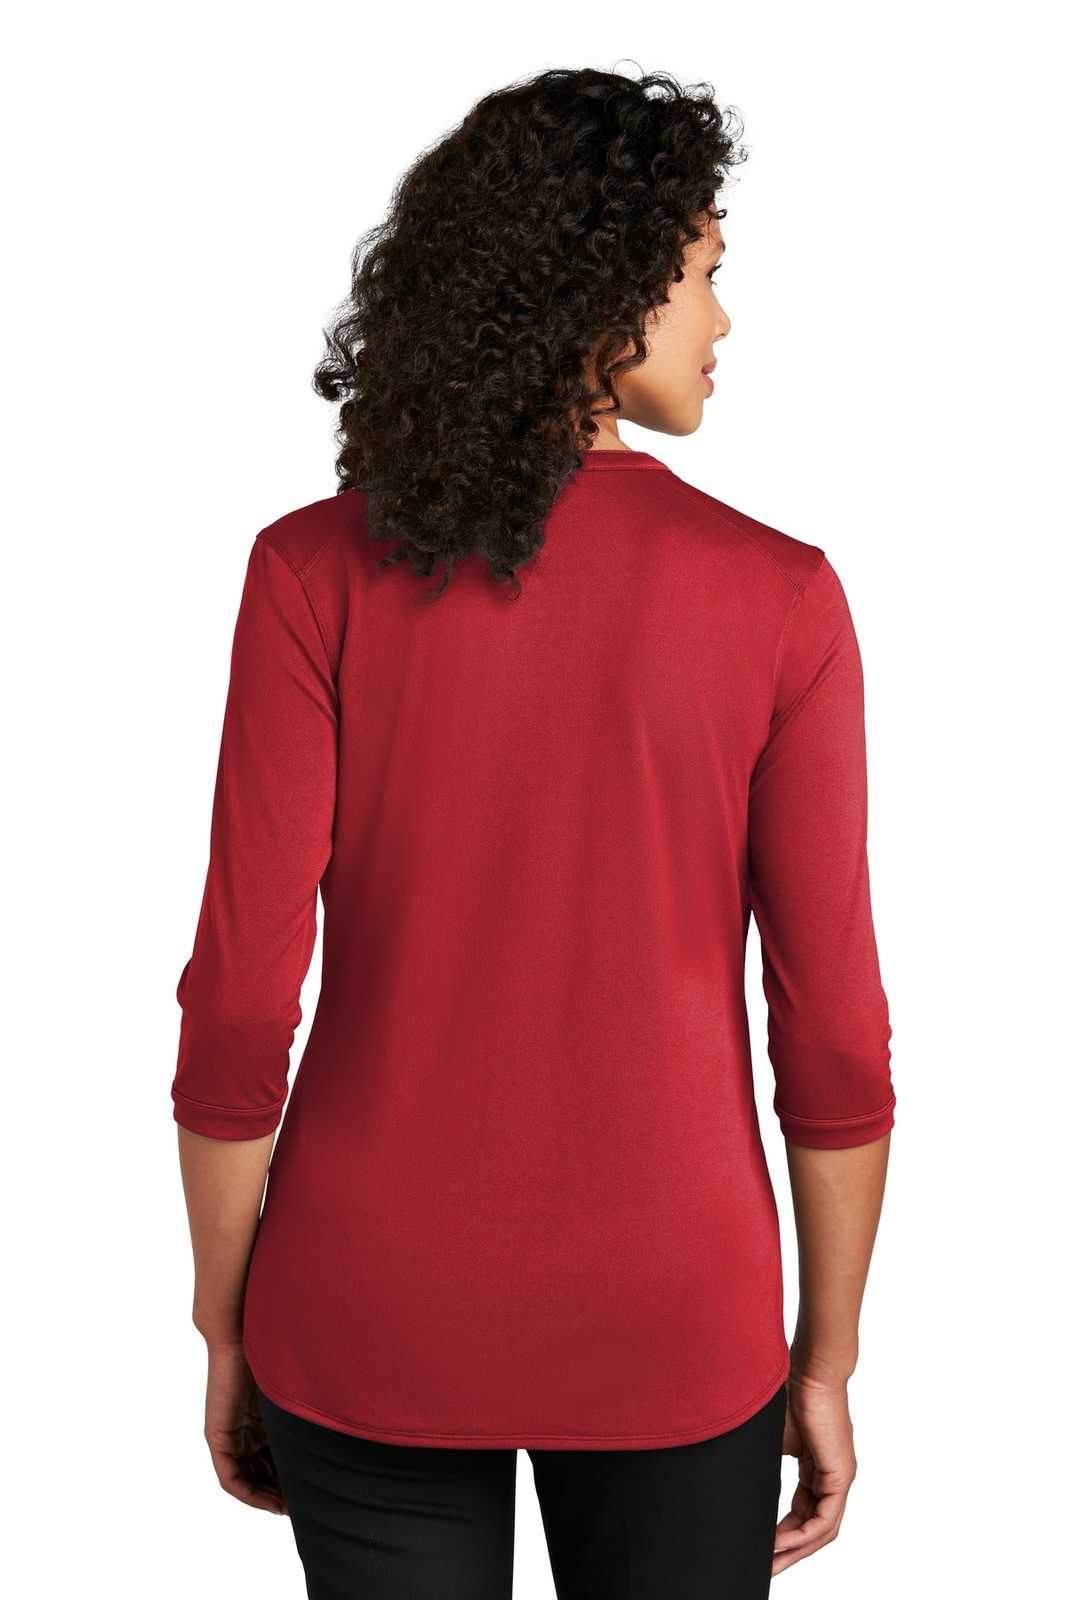 Port Authority LK750 Ladies UV Choice Pique Henley - Rich Red - HIT a Double - 2